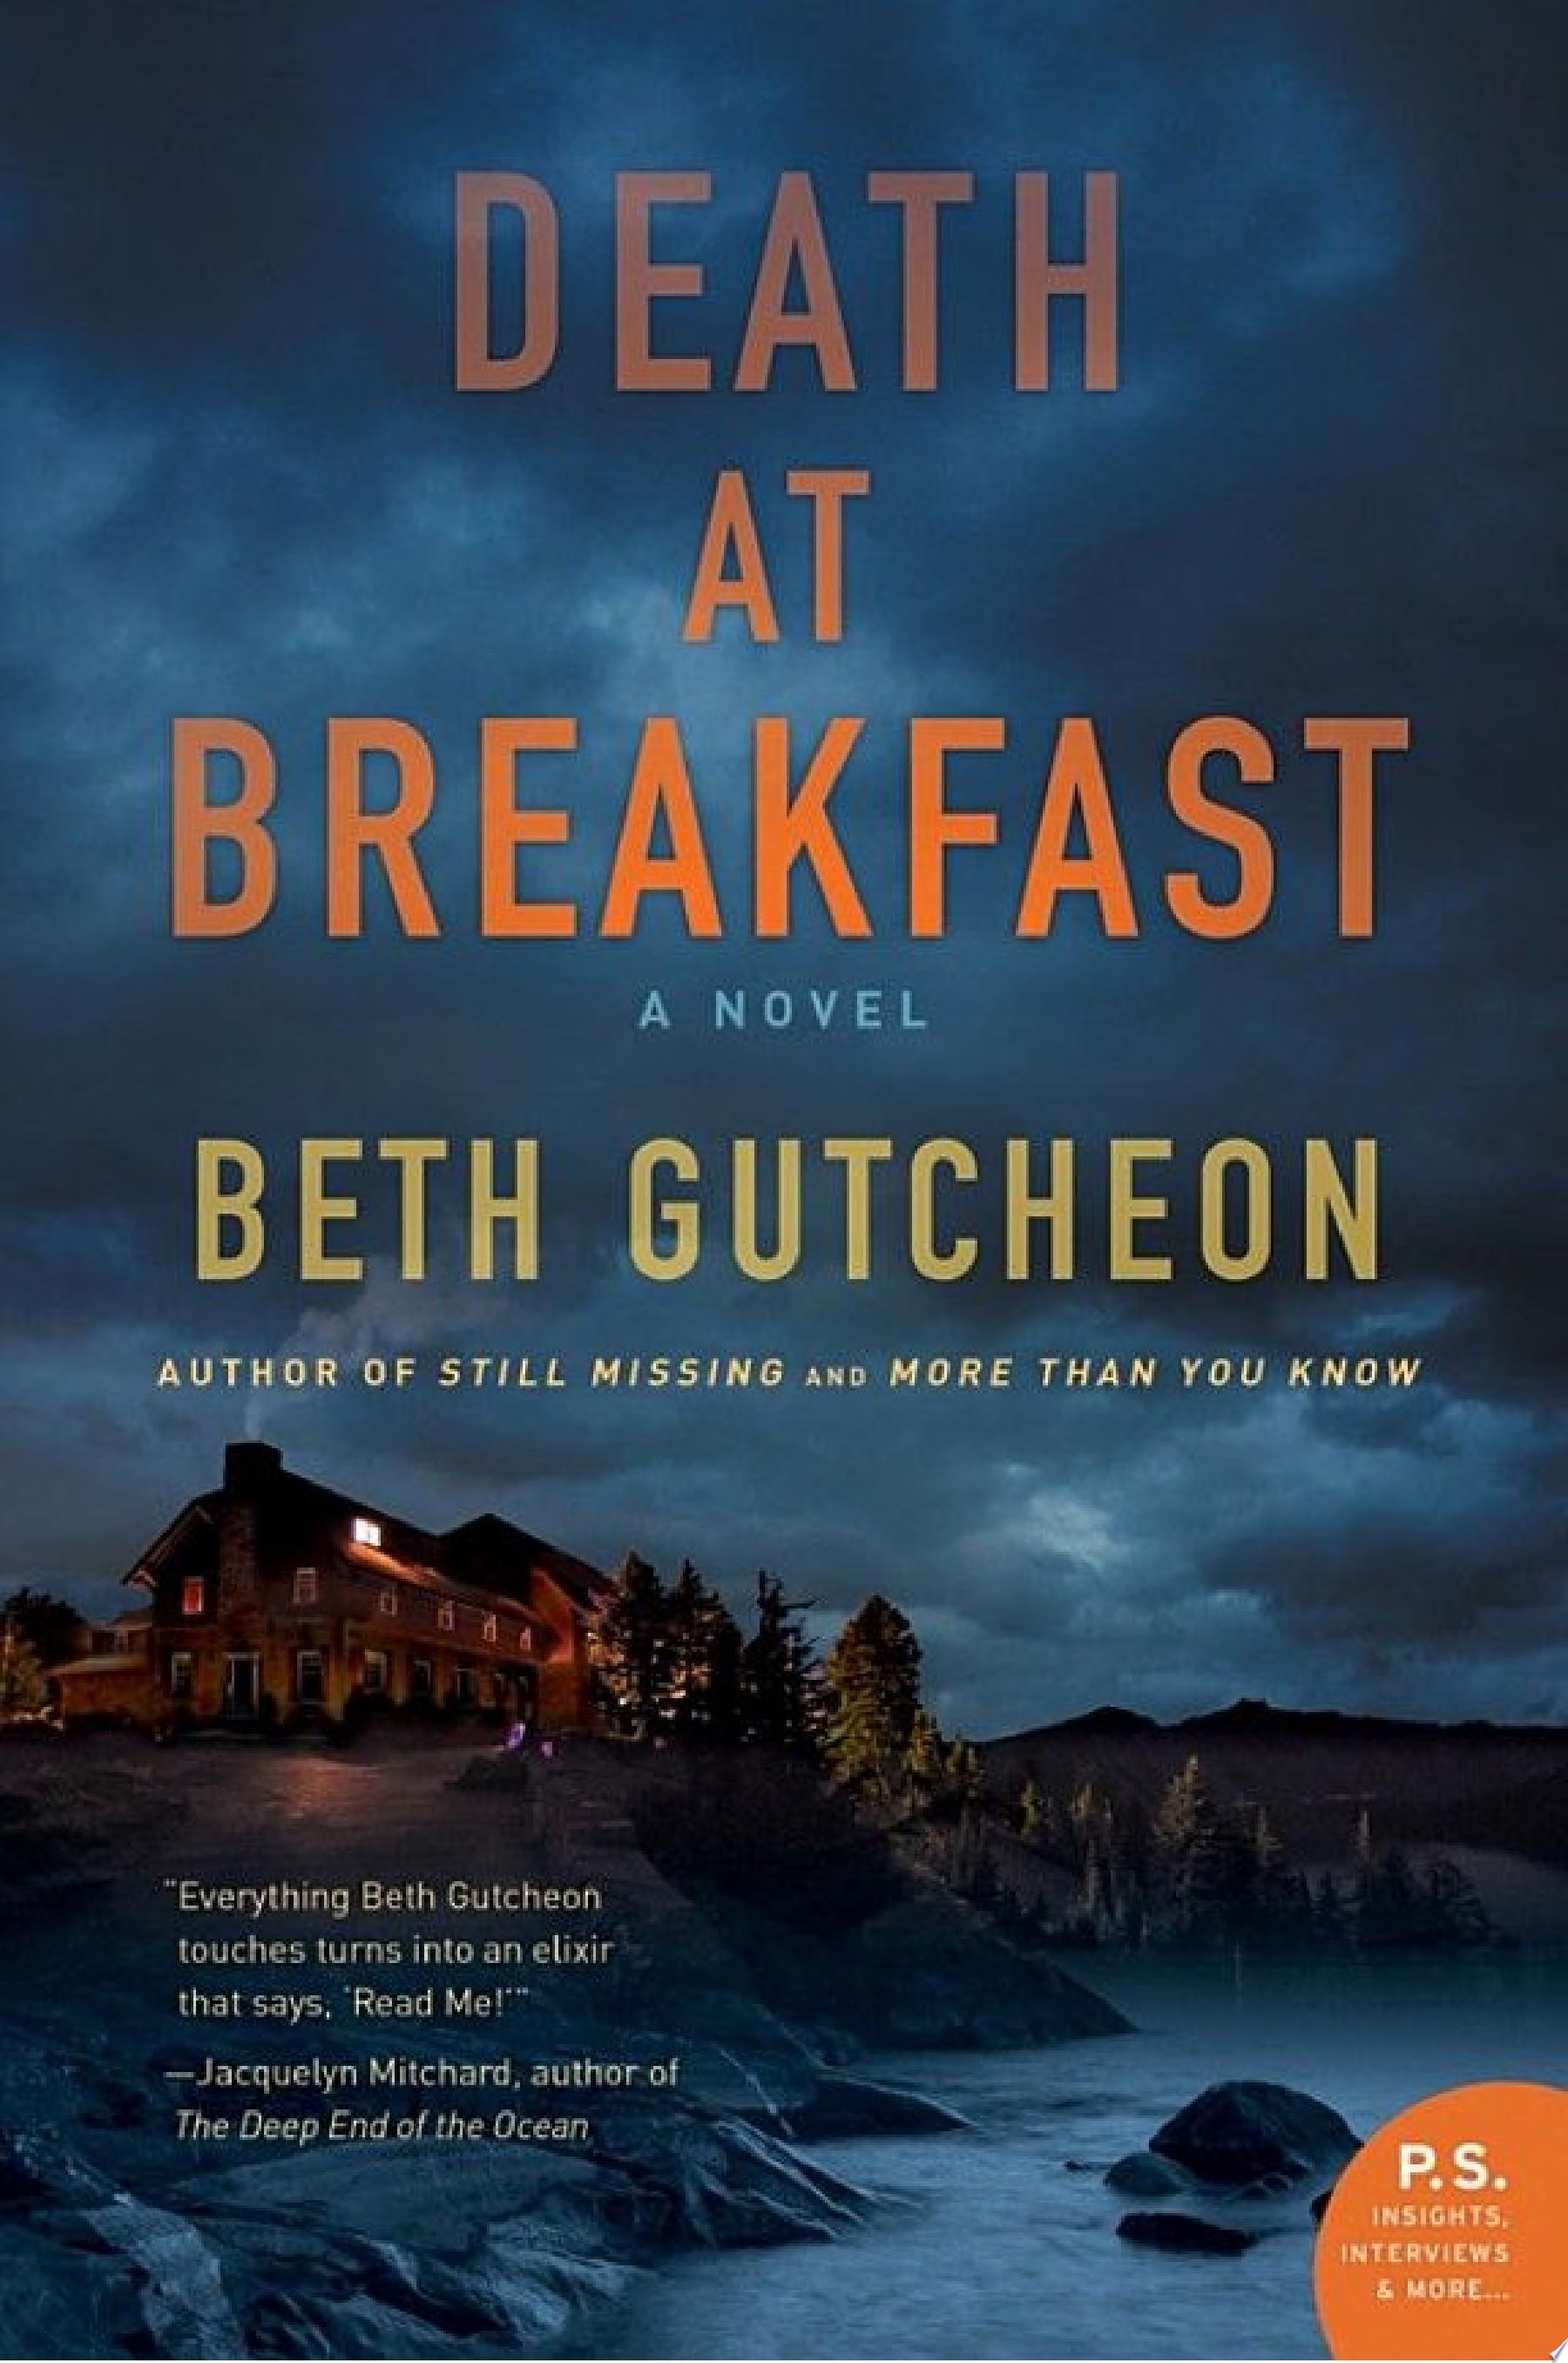 Image for "Death at Breakfast"